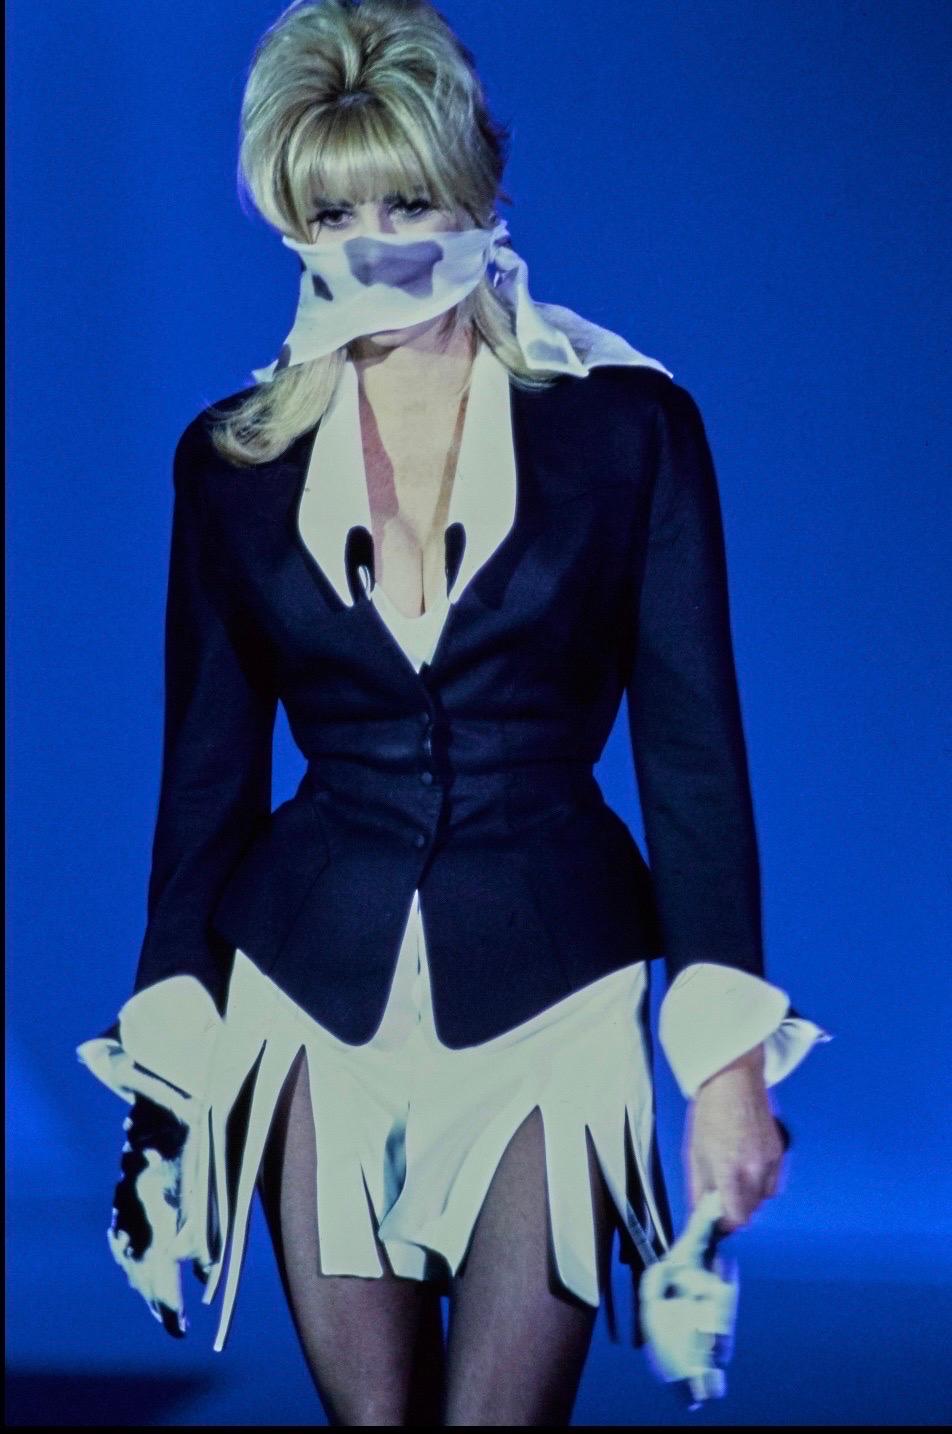 Incredible rare Thierry Mugler black jacket with a dramatic pointed white collar and matching white cuffs from the Spring Summer 1992 collection and as seen on the runway.
Made in France
Fitted waist, pointed cuffs
Closes with two snap